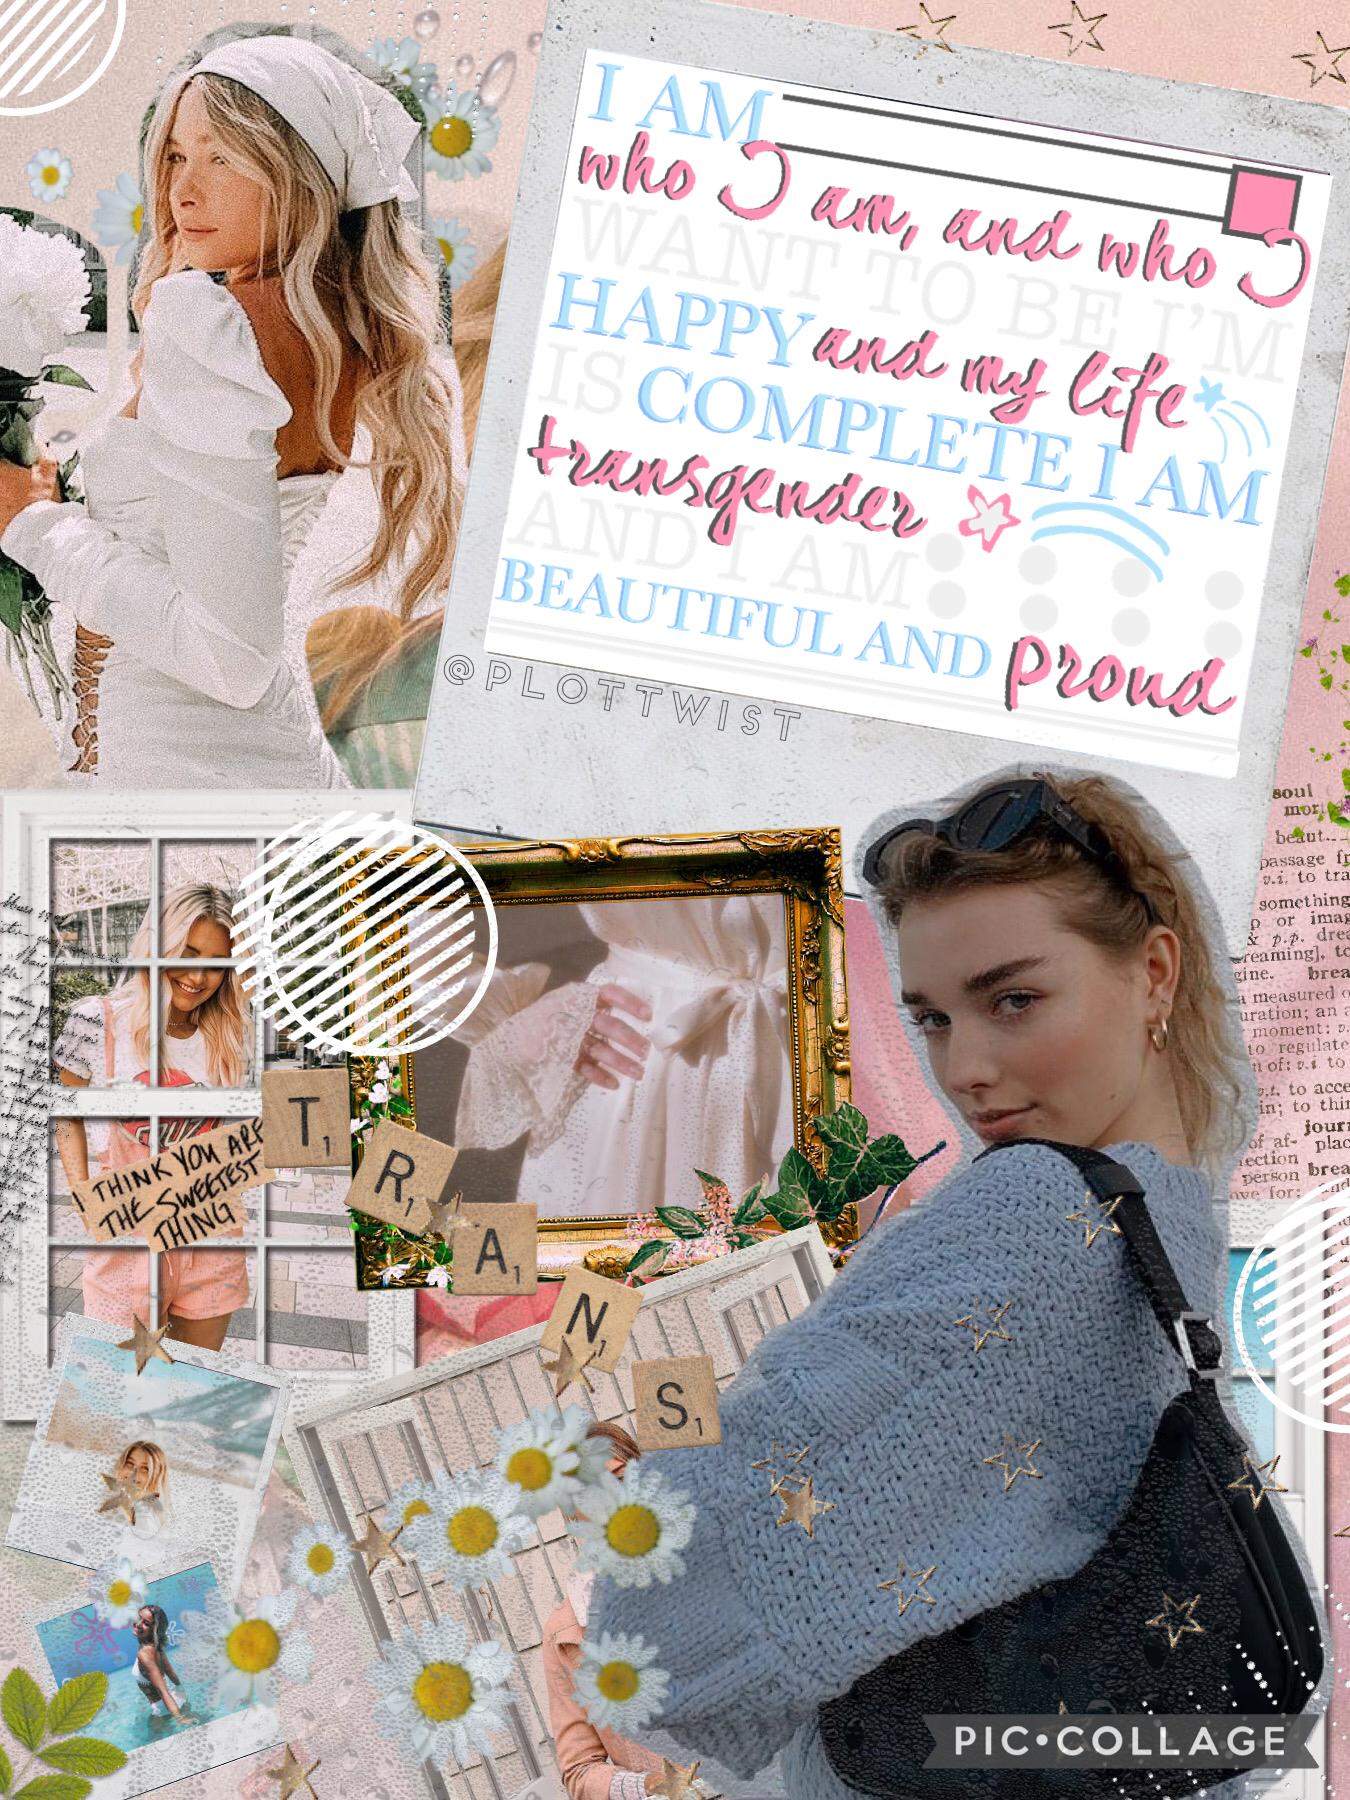 Pride flag collage #6! 
Transgender!! I couldn’t wait to do this one! Check the remixes for info about transgenders! 🏳️‍⚧️